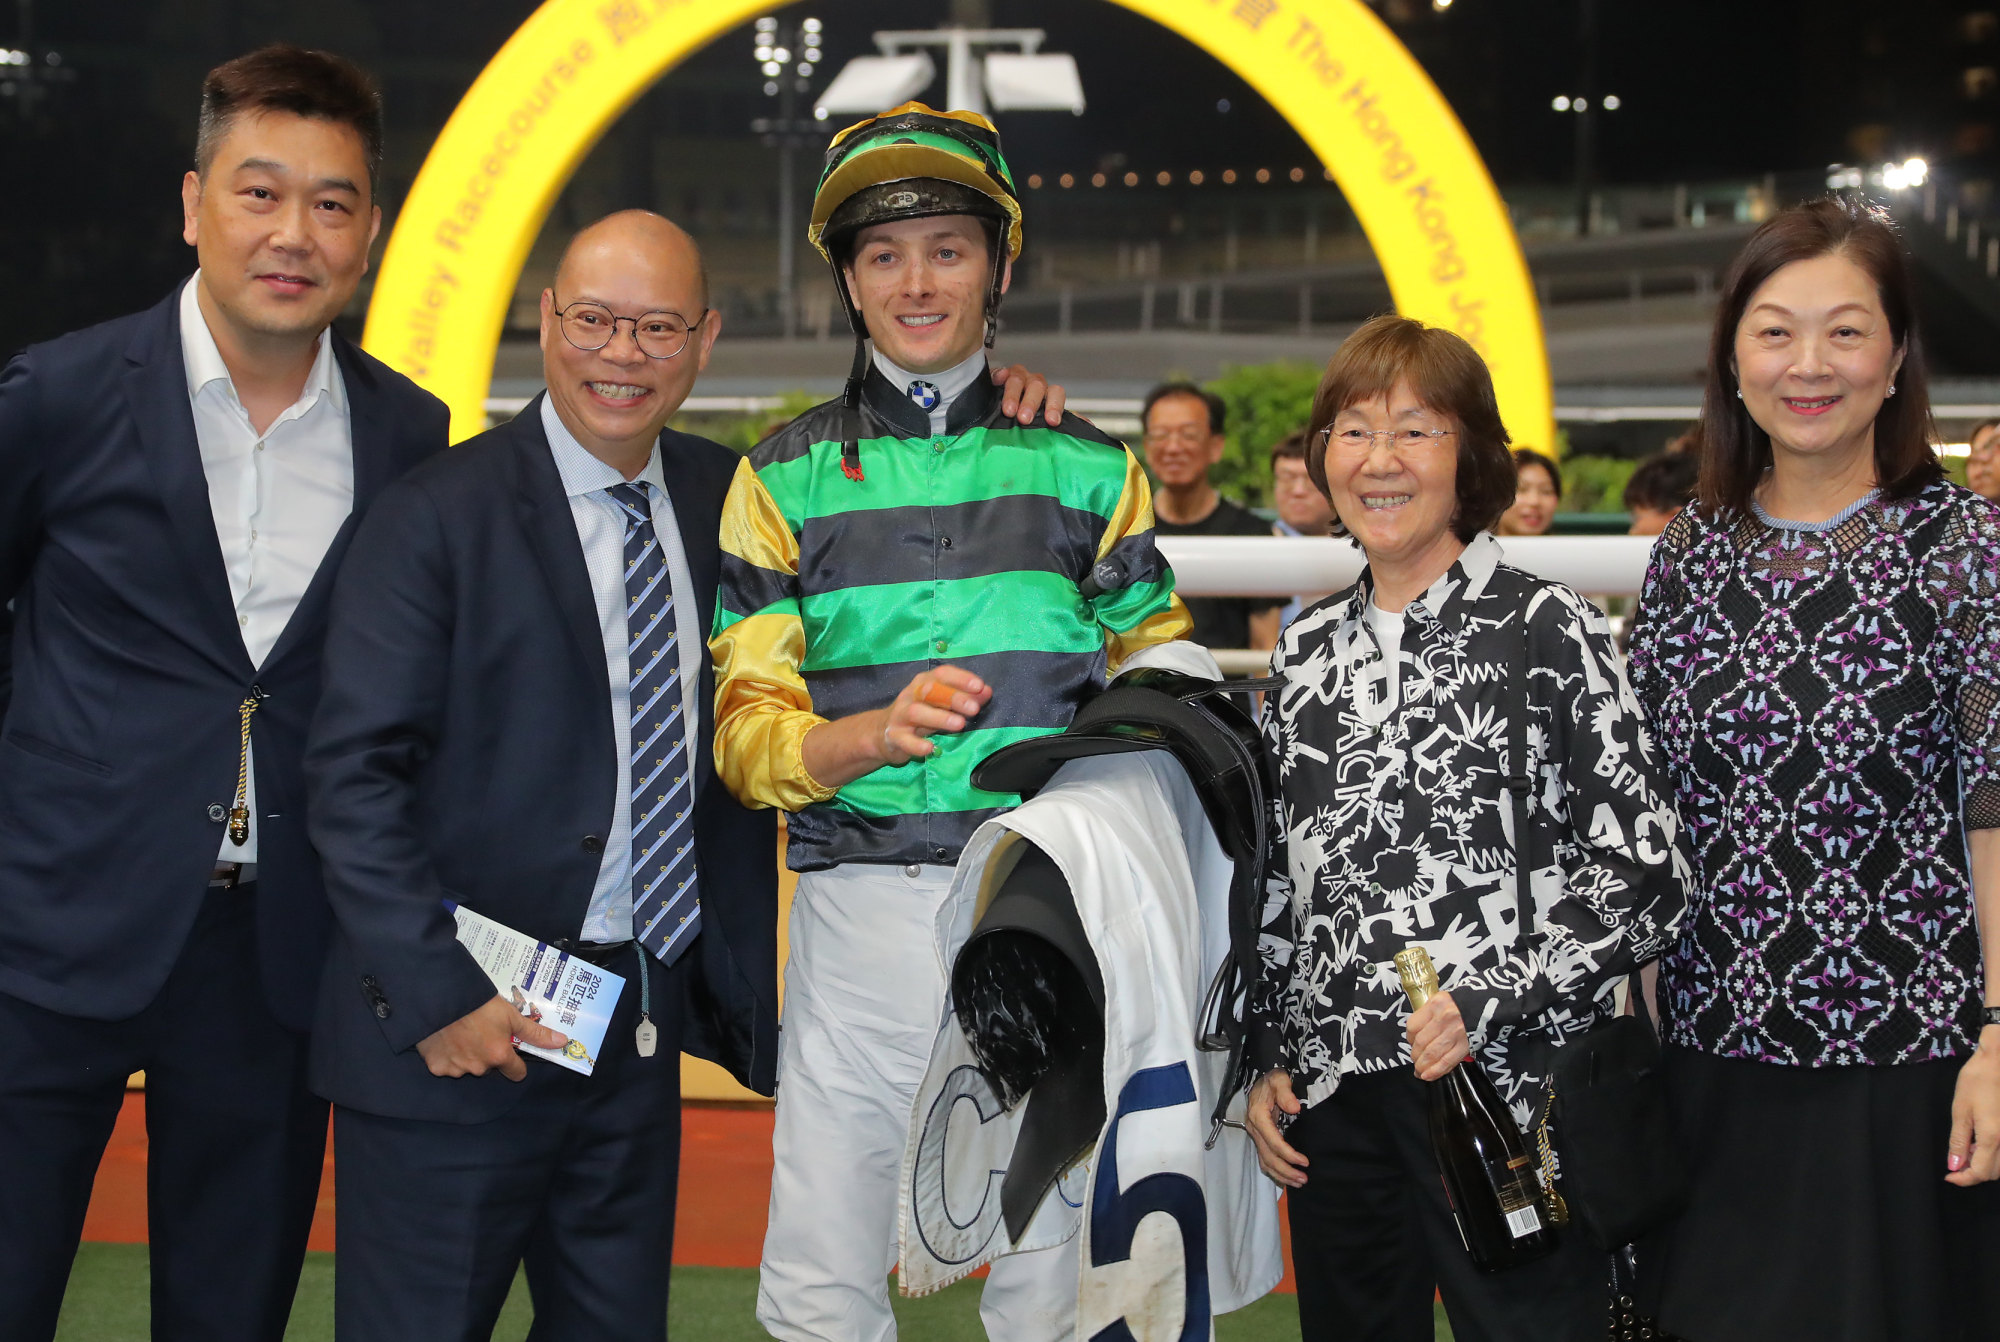 Trainer Chris So (second from left), jockey Harry Bentley and connections celebrate Our Lucky Glory’s win.